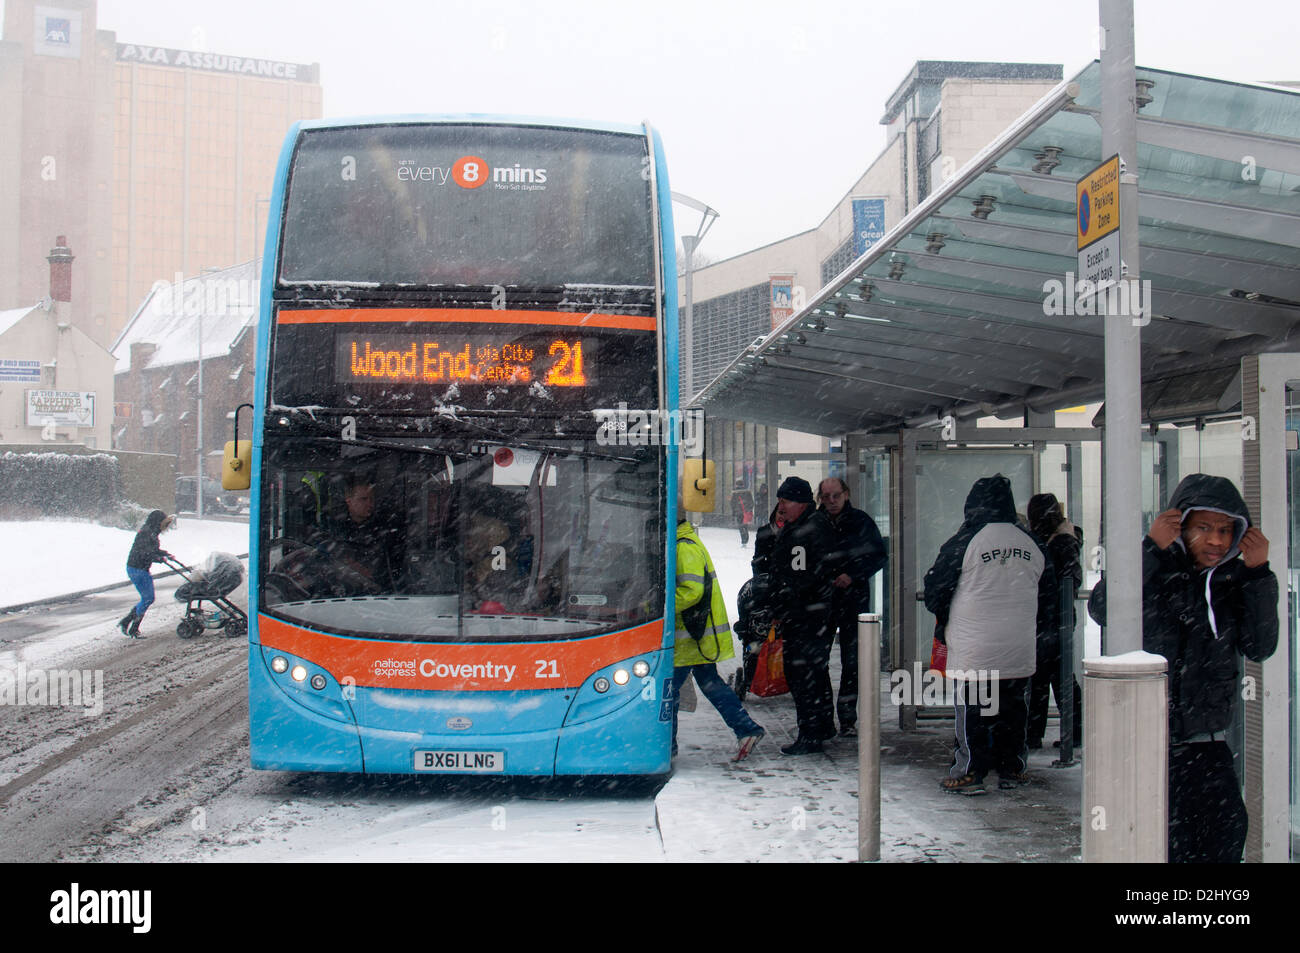 Bus in snowy weather, Coventry city centre, UK Stock Photo